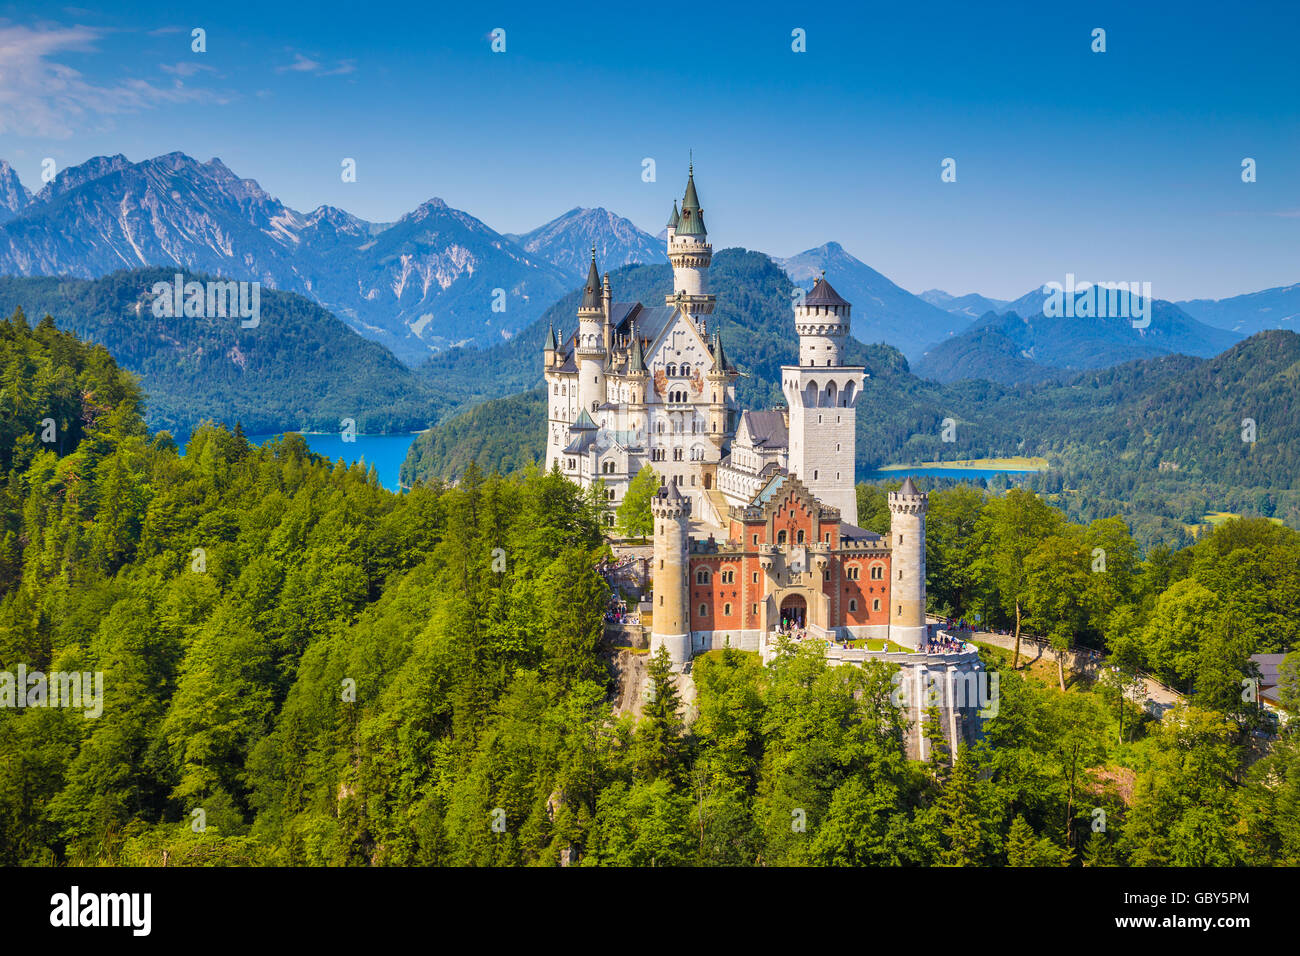 Beautiful view of world-famous Neuschwanstein Castle, one of Europe's most visited castles, in summer, Bavaria, Germany Stock Photo